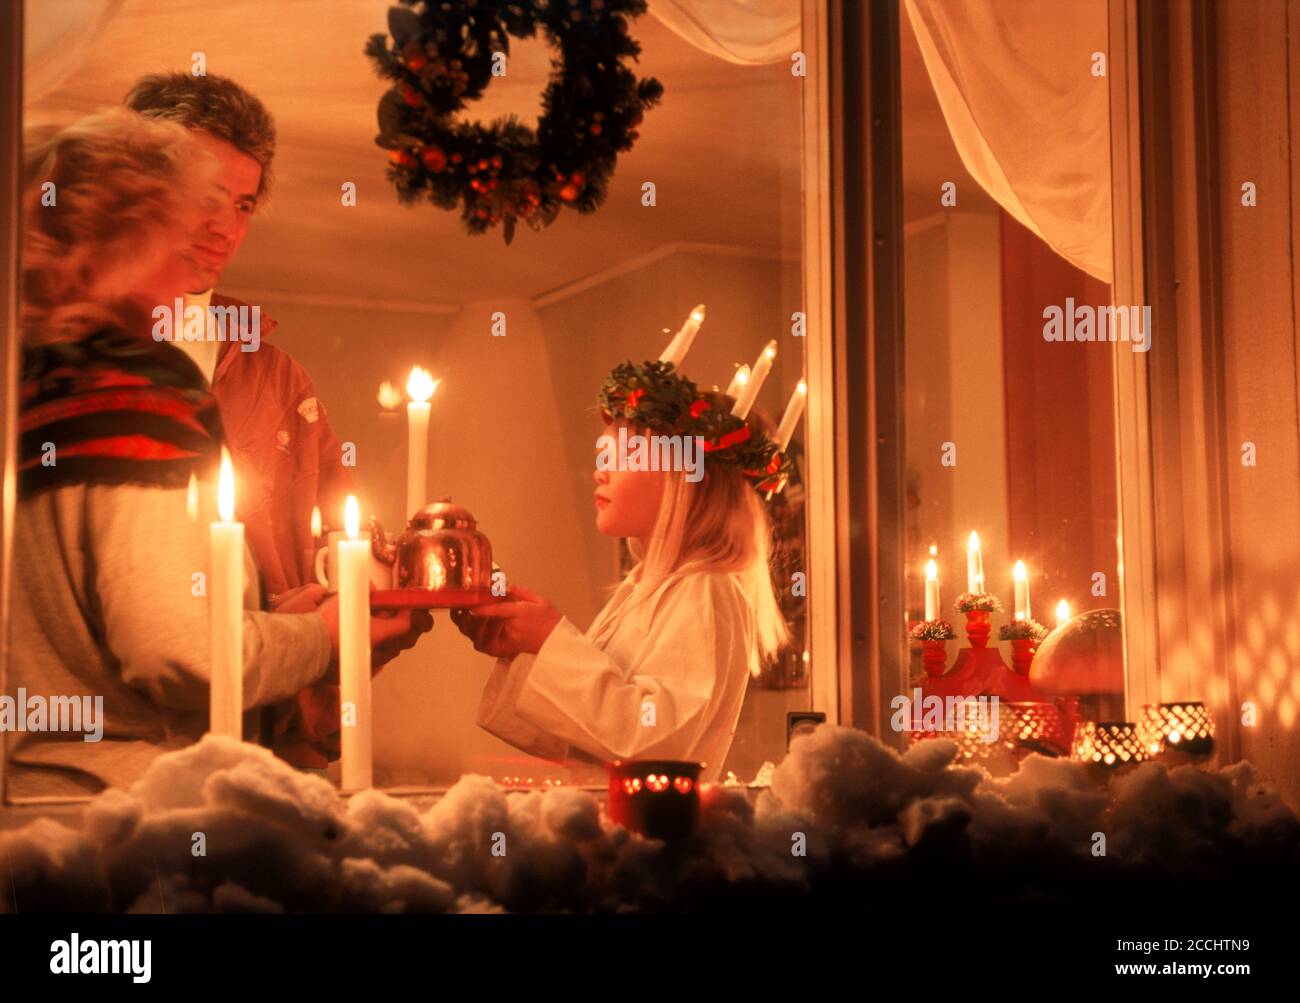 December 13th in Sweden is Santa or Saint Lucia Day when children wear coronets of candles and bring cakes and coffee to parents Stock Photo